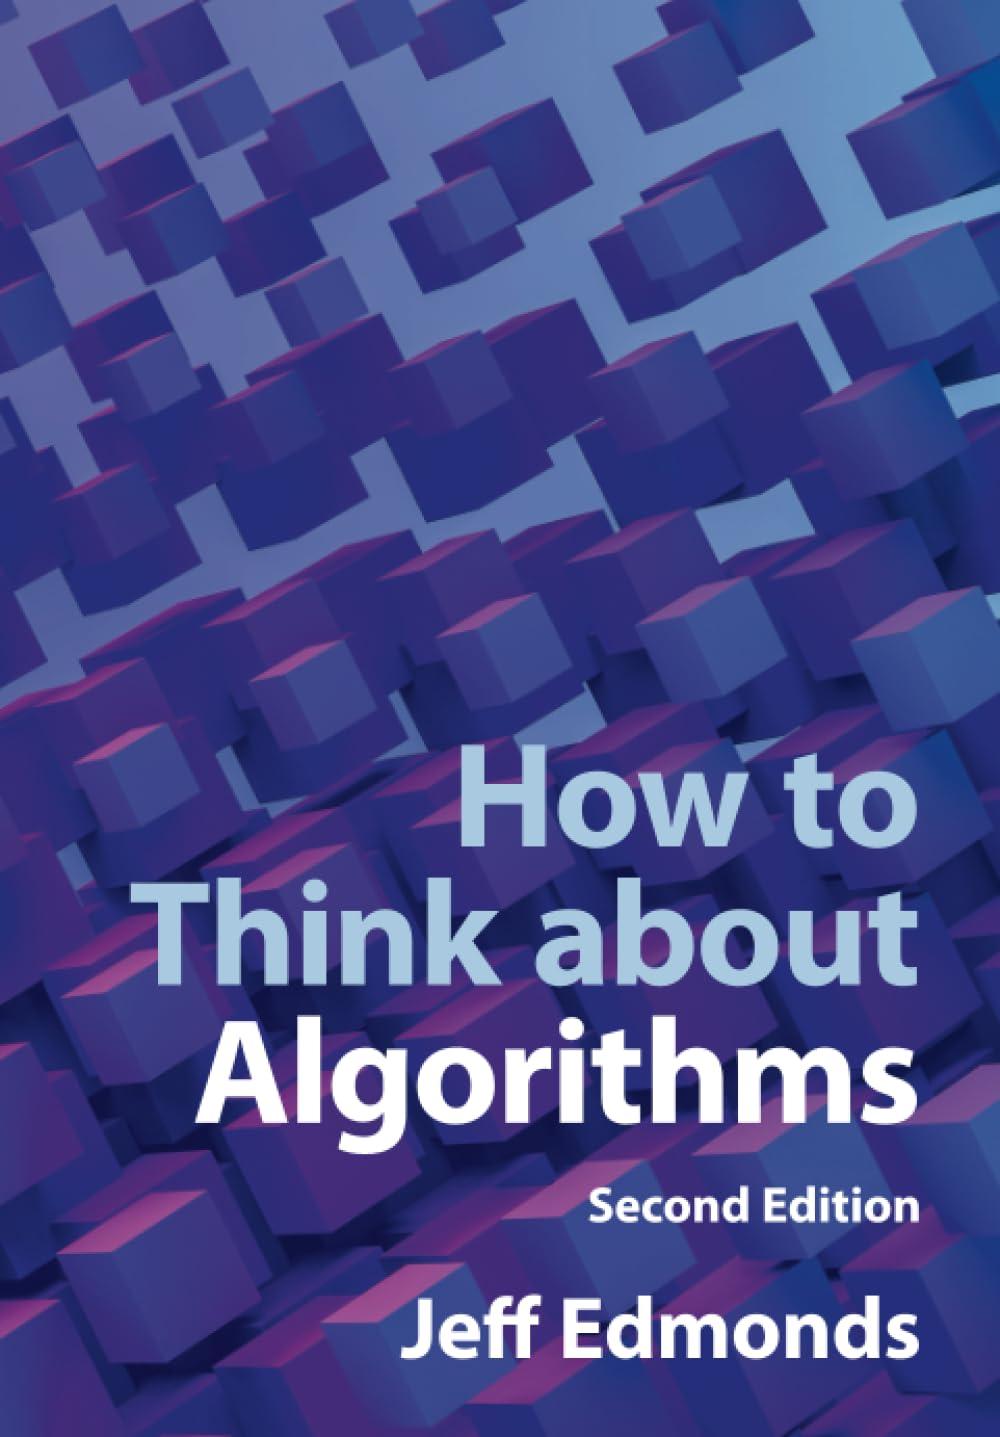 how to think about algorithms 2nd edition jeff edmonds 1009302132, 978-1009302135